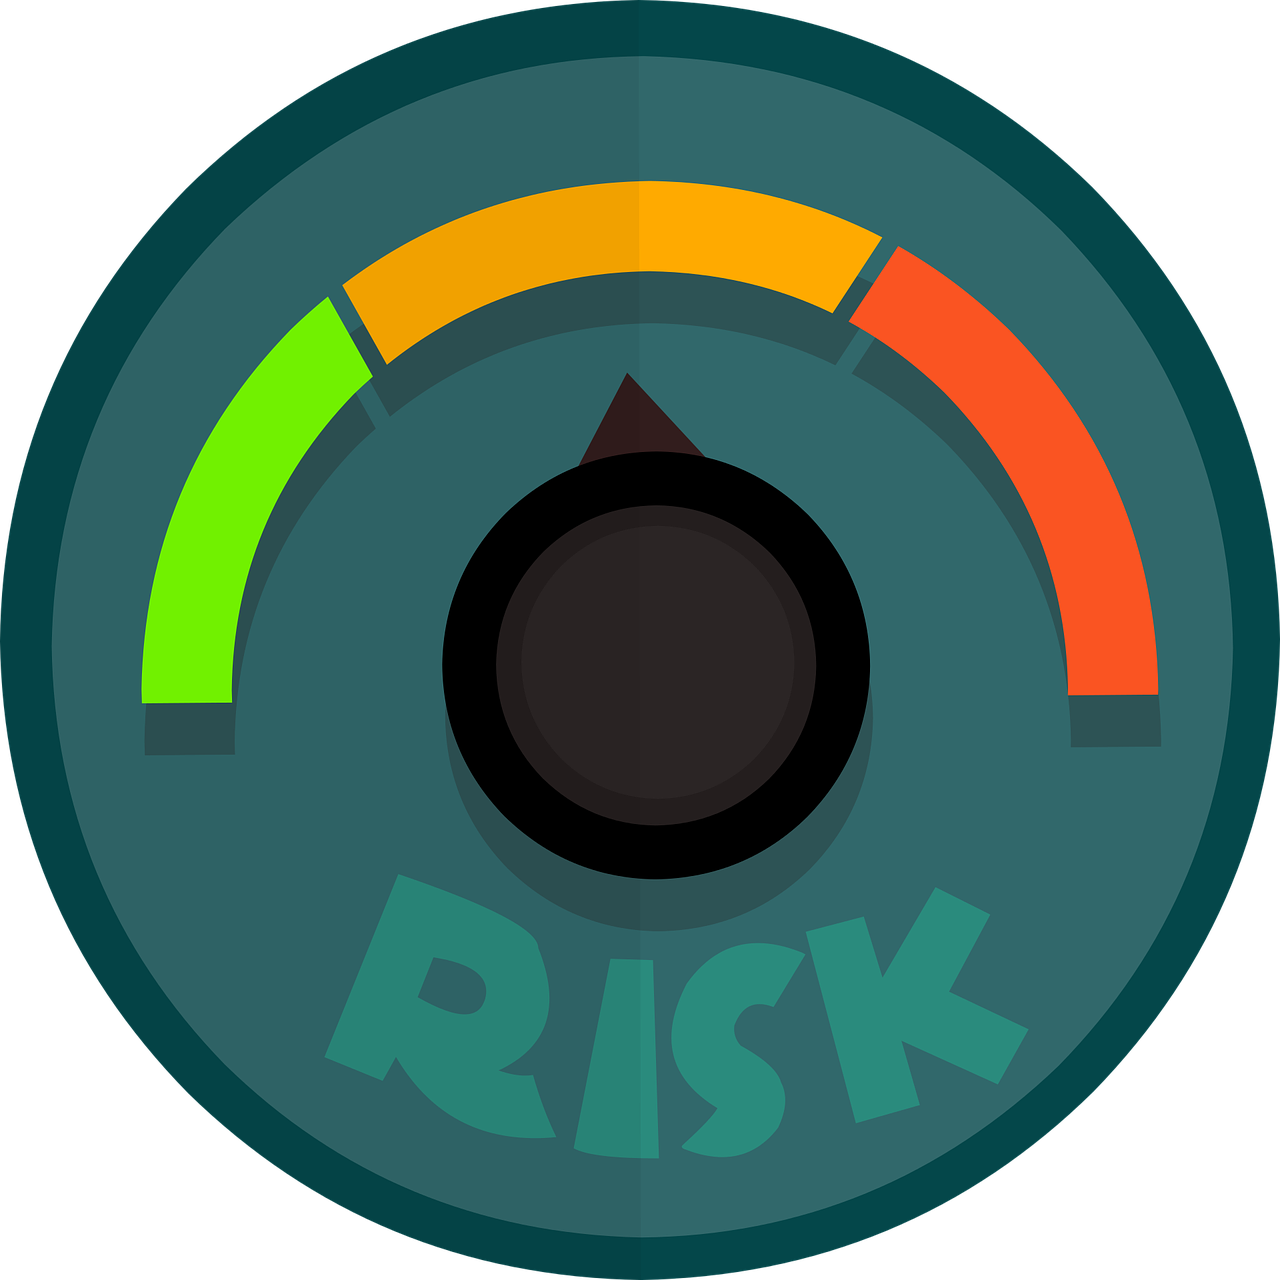 Case in Point: ISO 31000 and Risk Management - Risk Management and Standardization